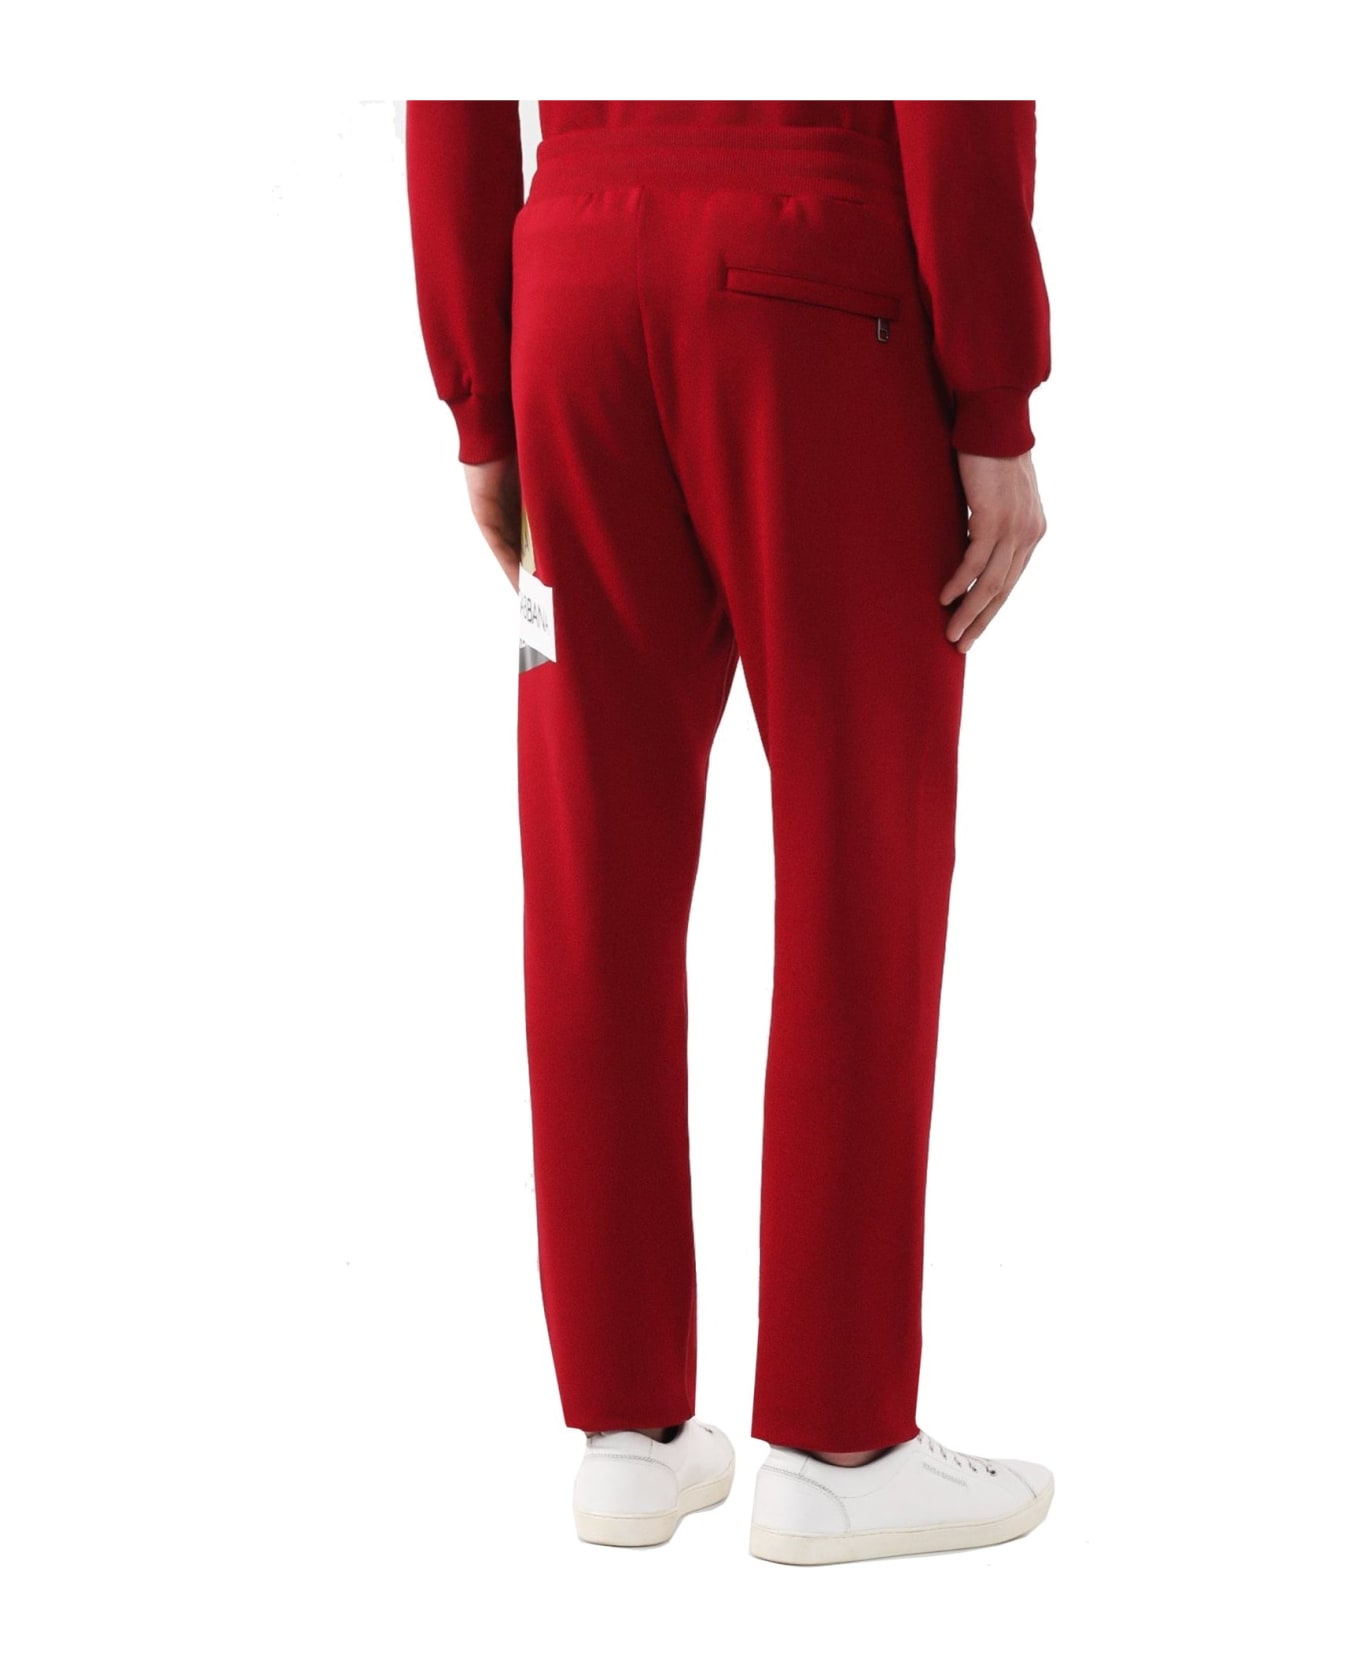 Dolce & Gabbana Jogging Style Pants - Red